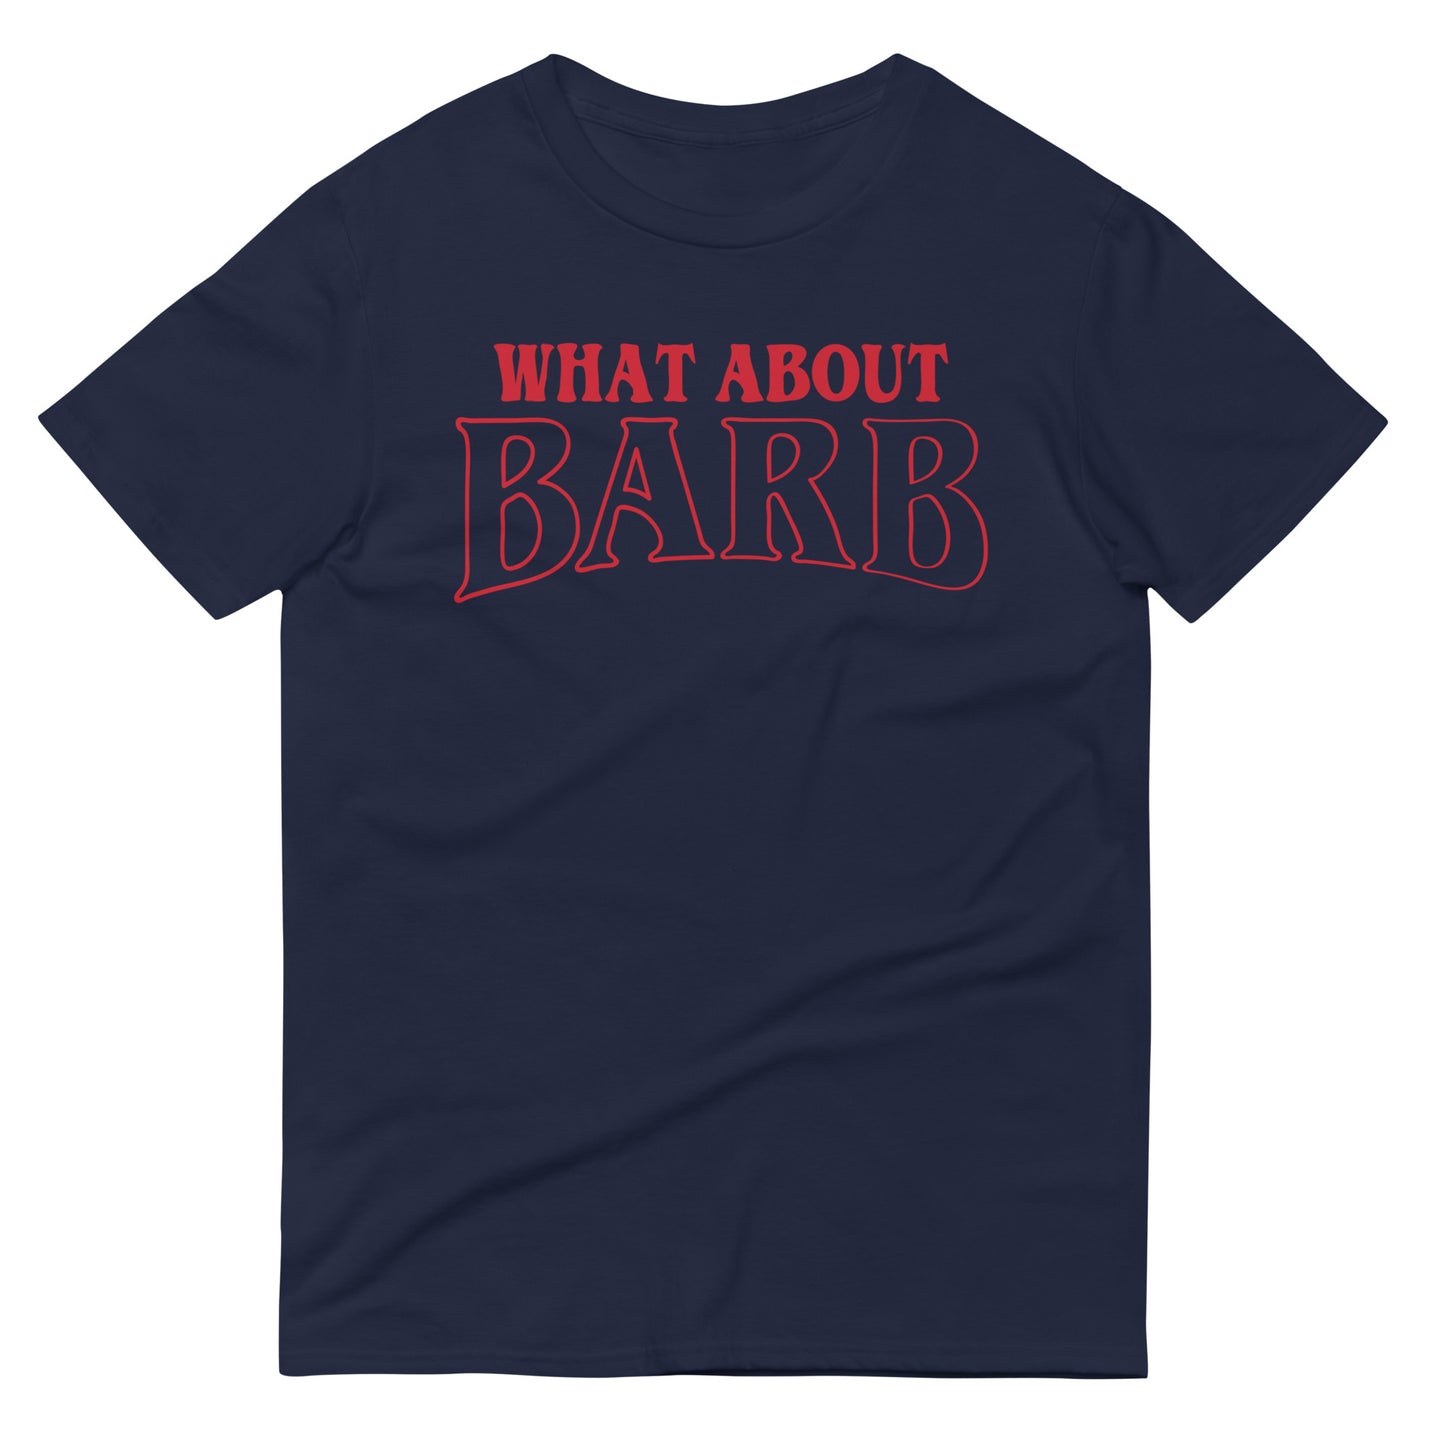 What About Barb? Men's Signature Tee